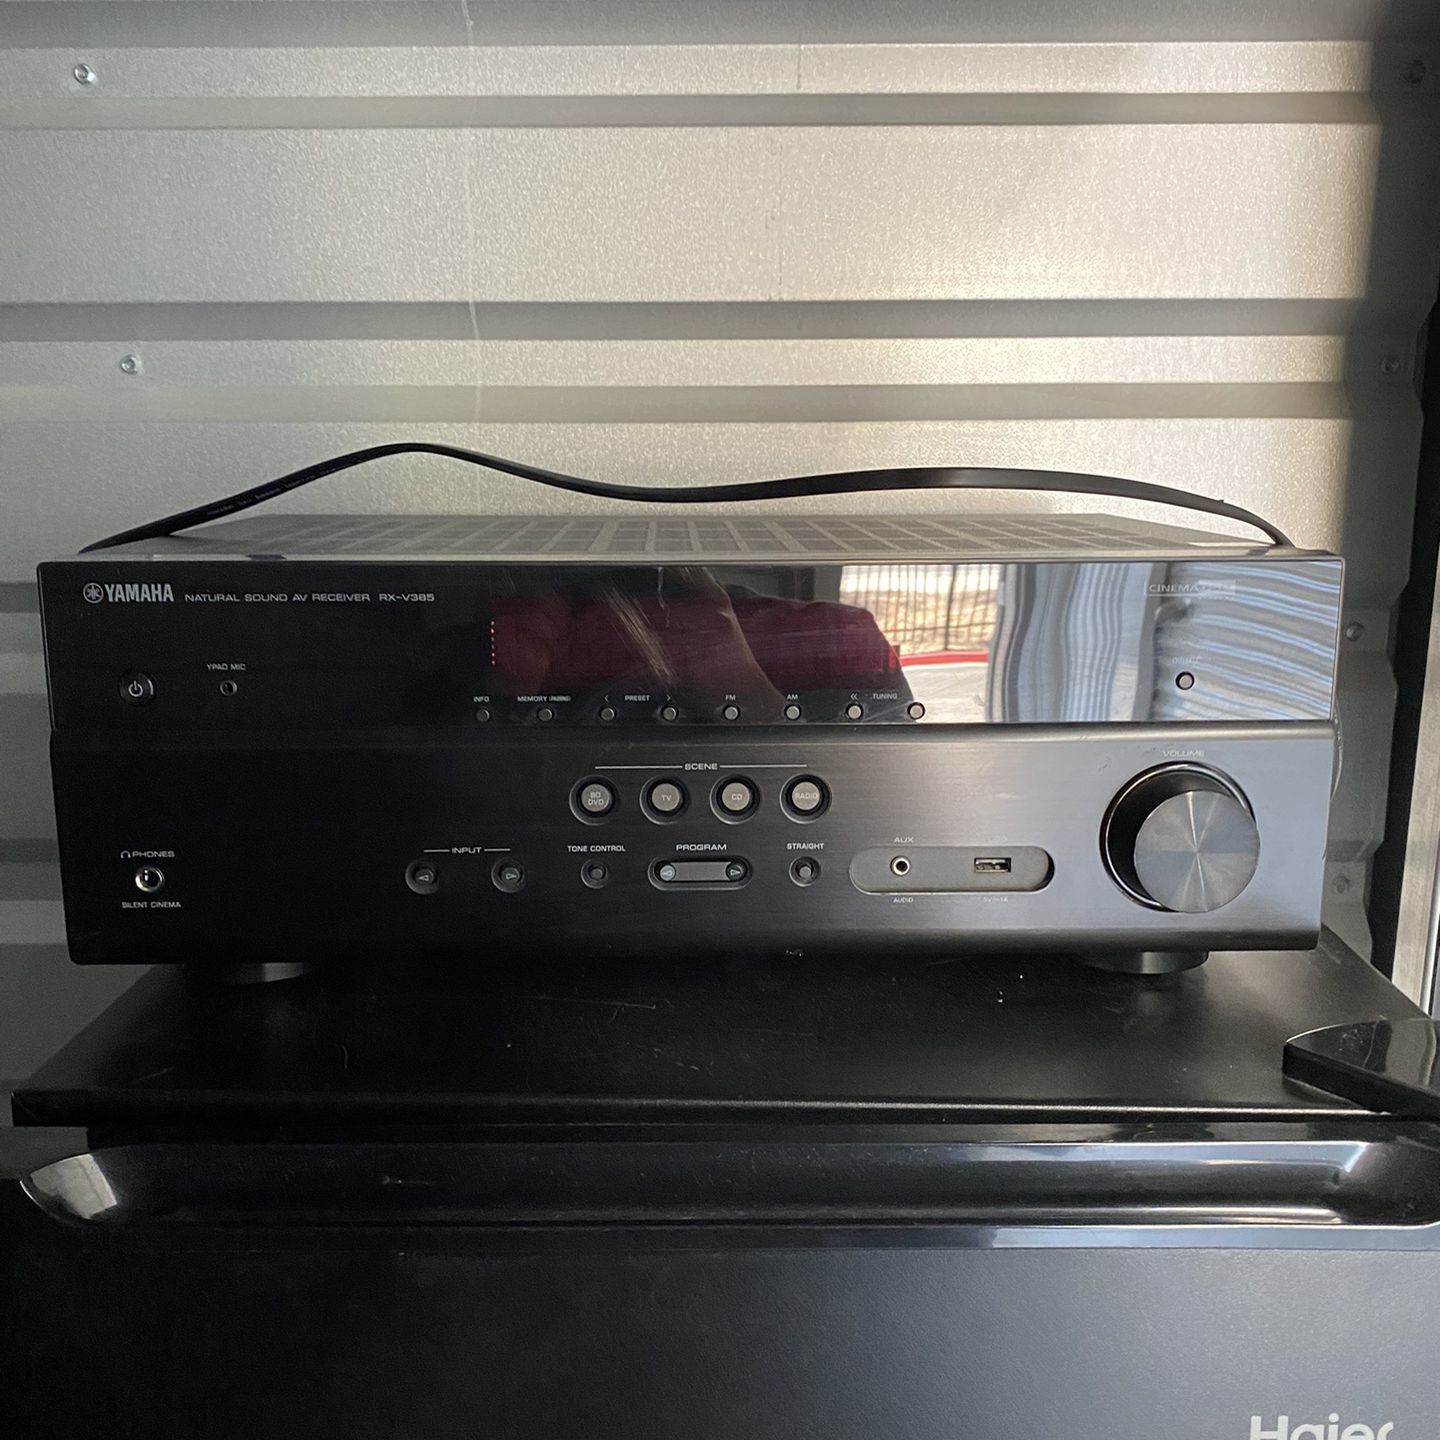 YAMAHA Receiver RX-V385 5.1-Channel 4K Ultra HD AV Receiver with Bluetooth